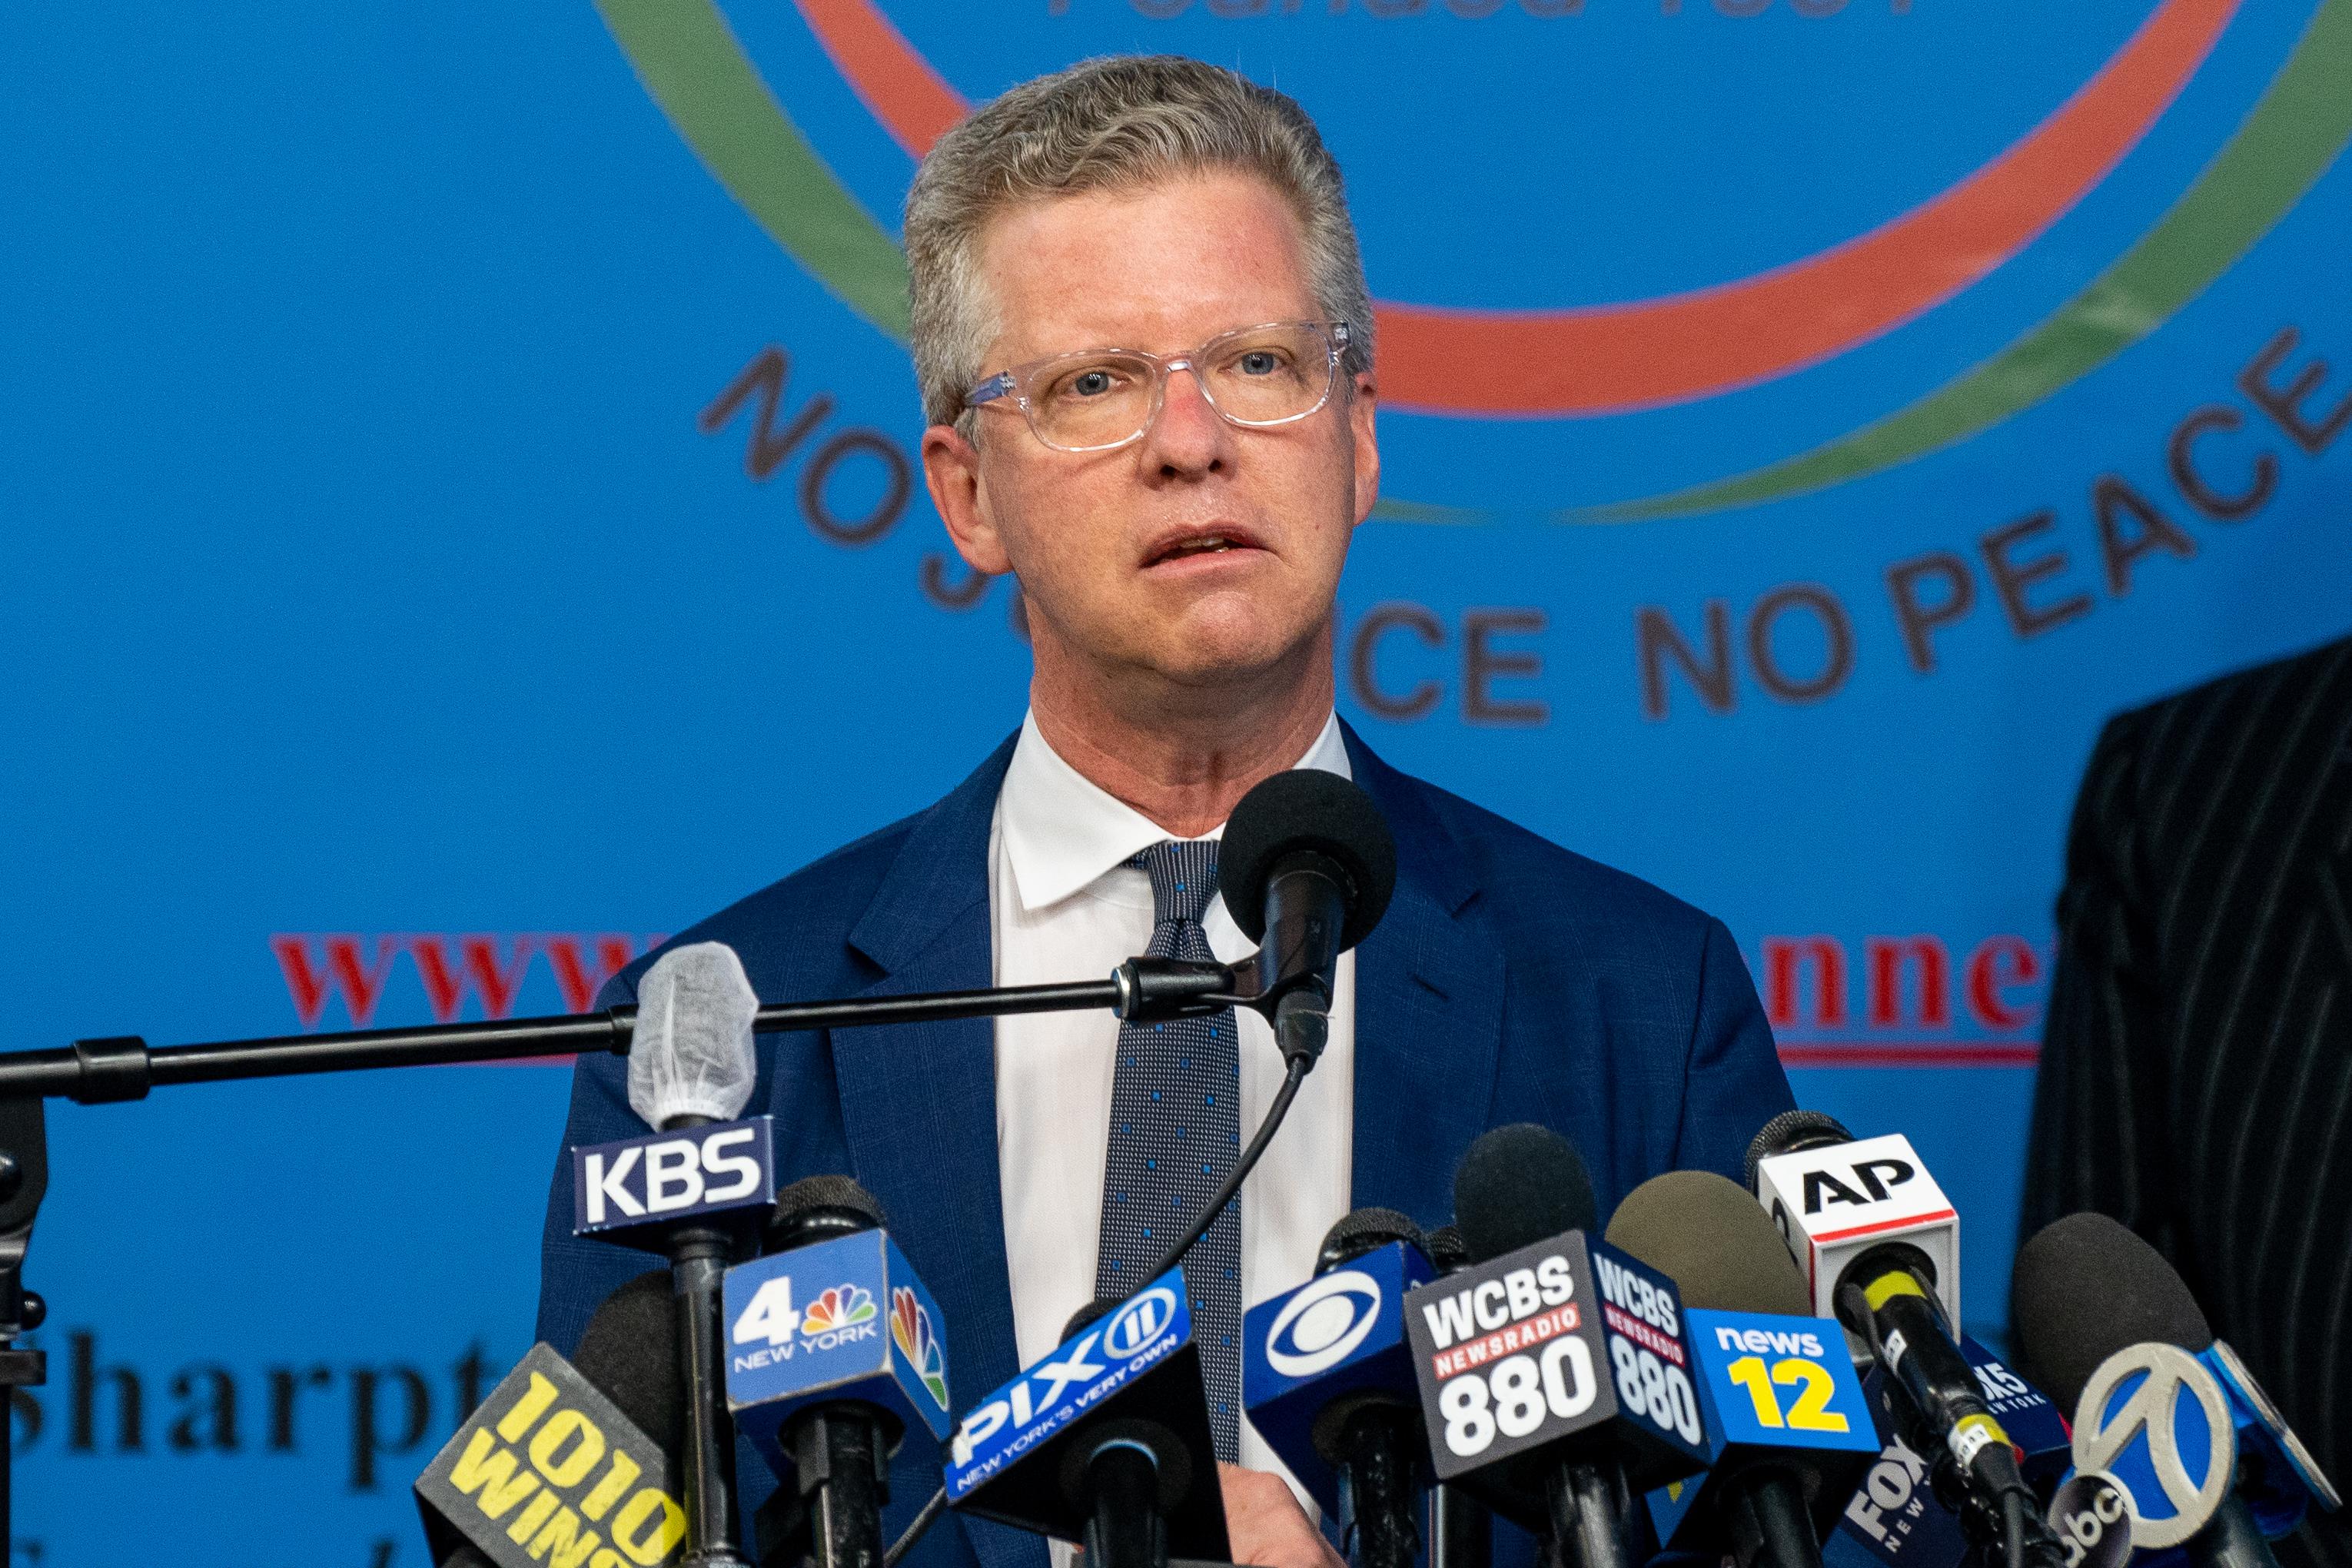 Shaun Donovan speaks at a mic during a press conference in New York City on March 18